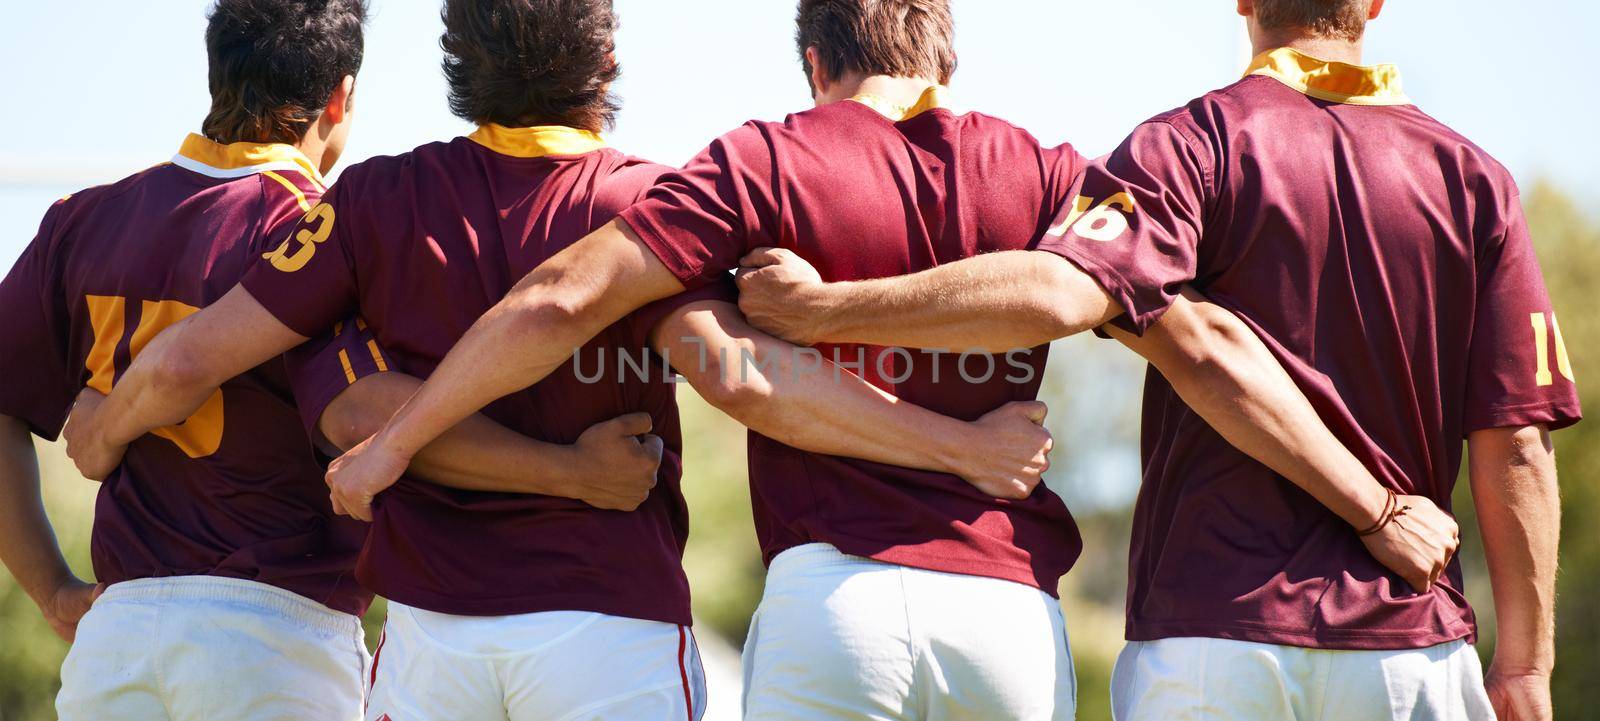 We came to win. Rearview shot of a young rugby team lining up for a scrum. by YuriArcurs